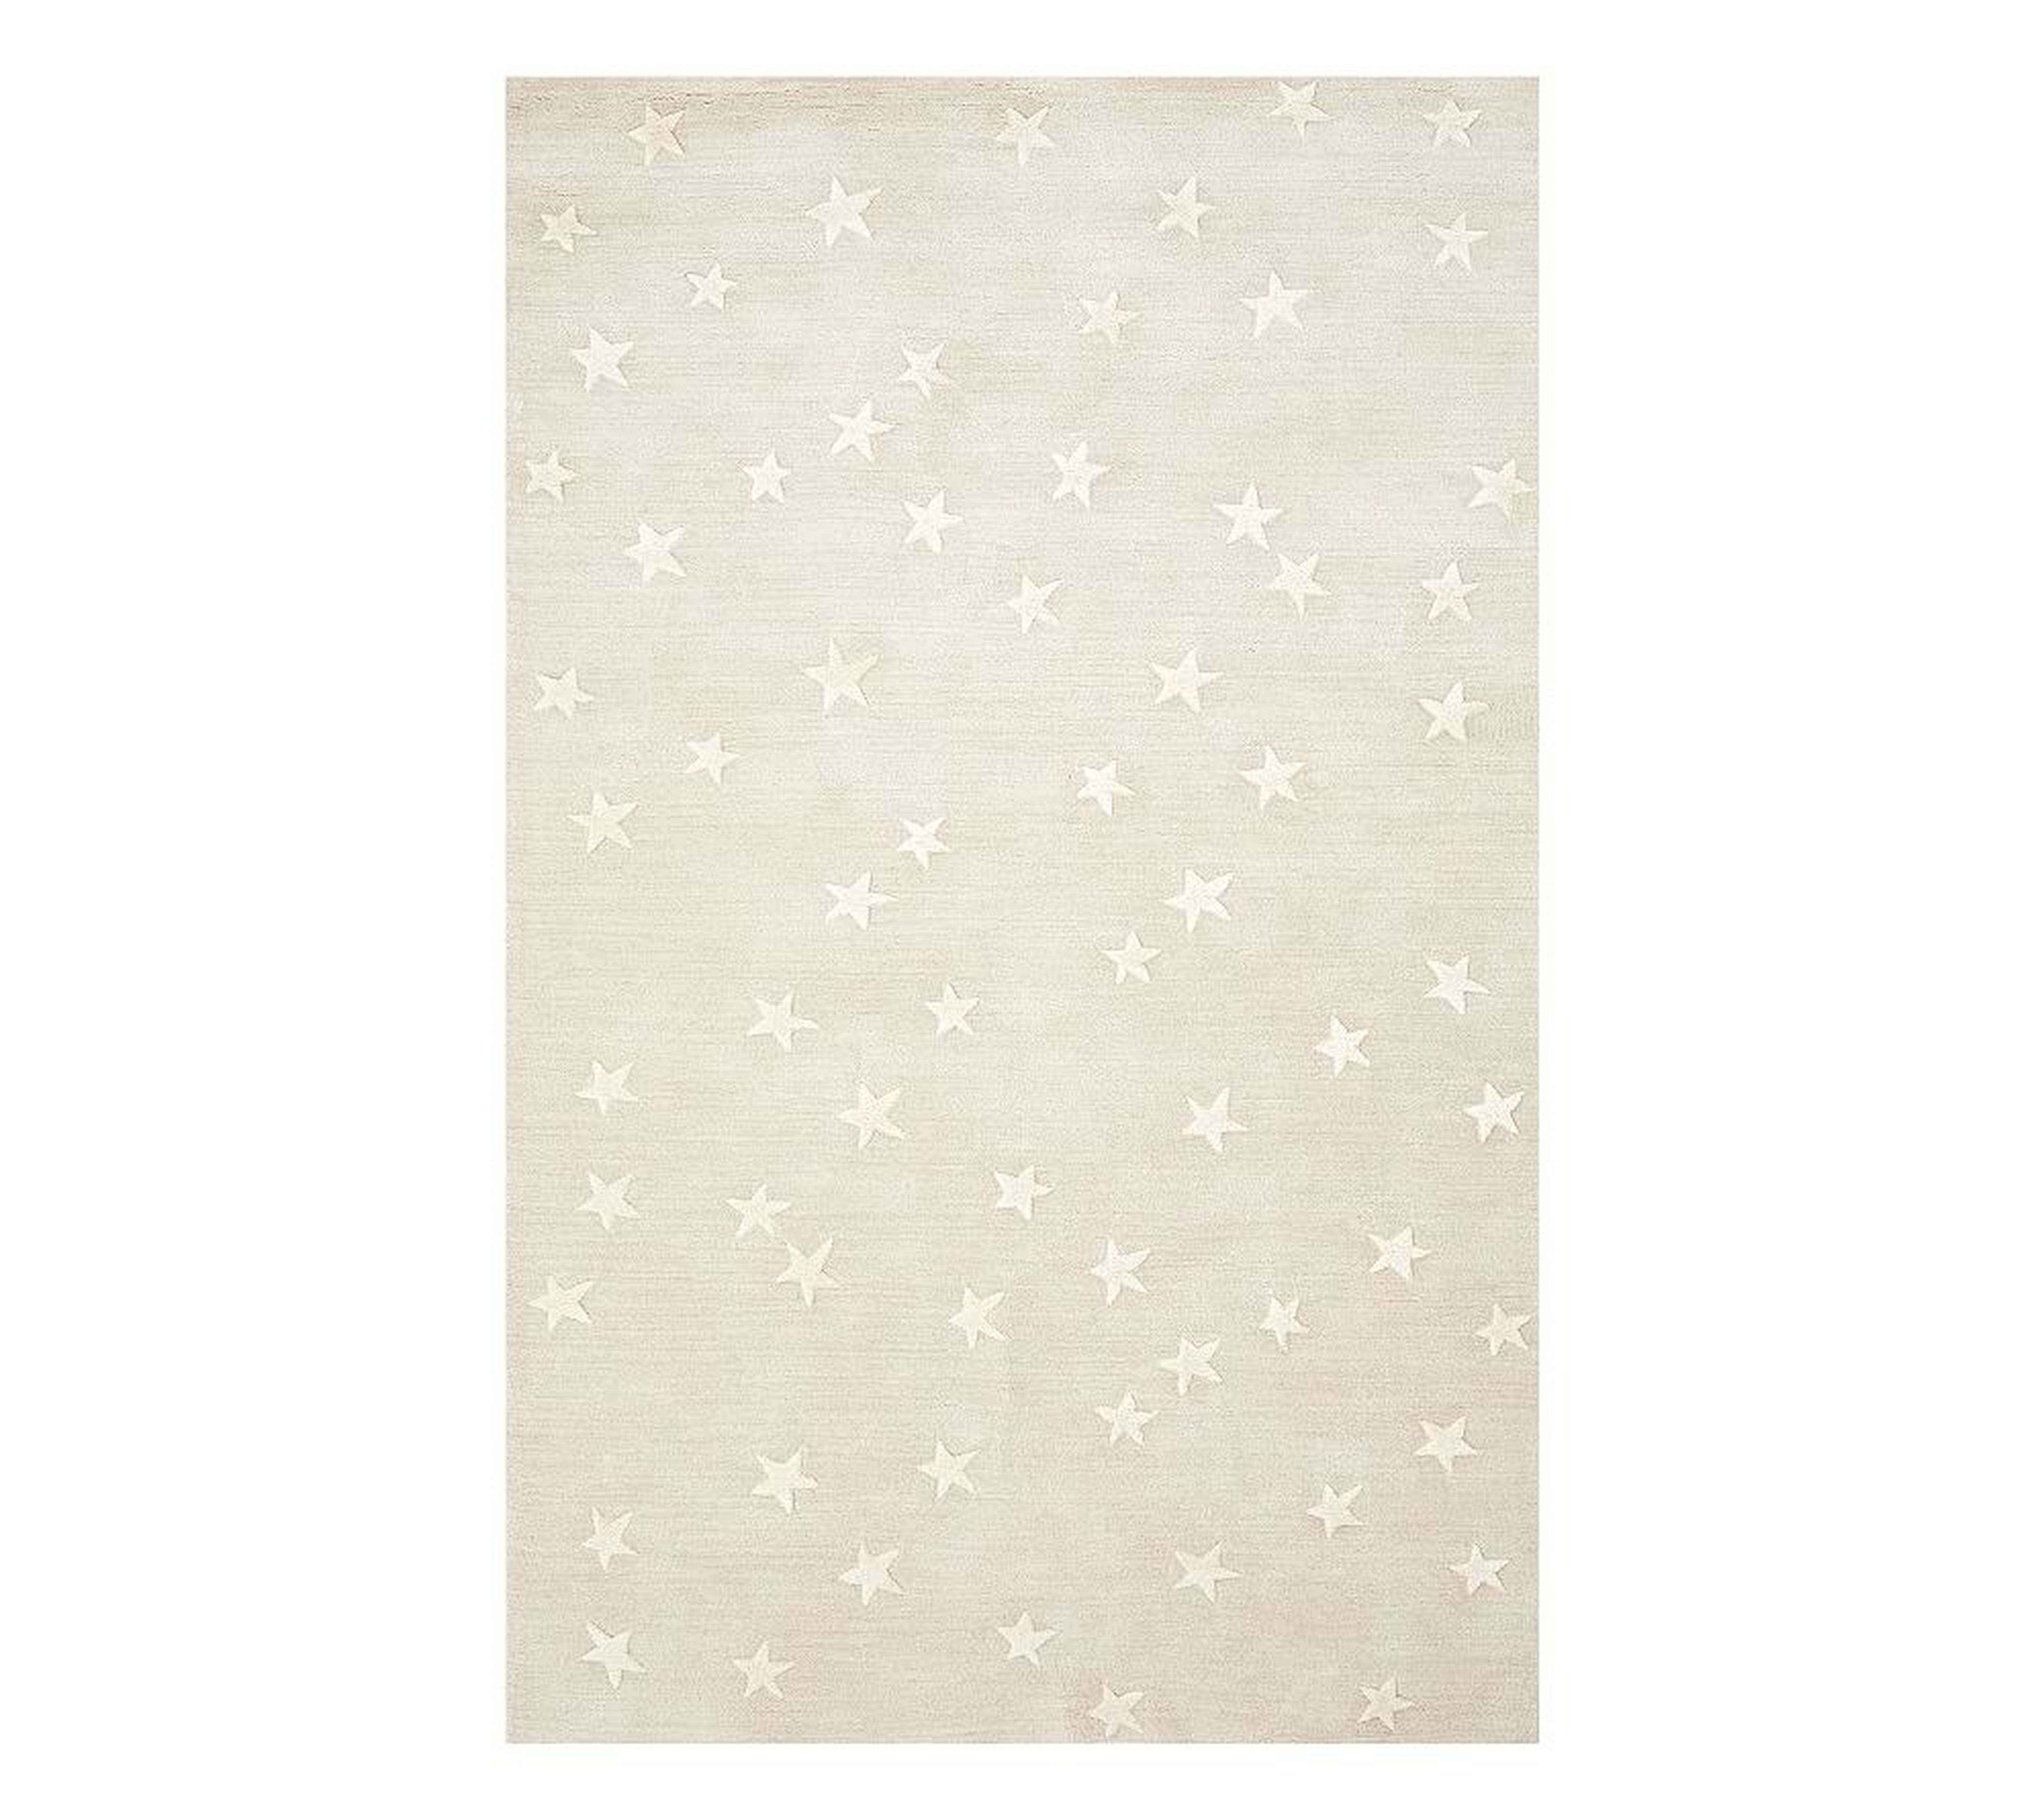 Starry Skies Rug, 7x10, Natural - Pottery Barn Kids